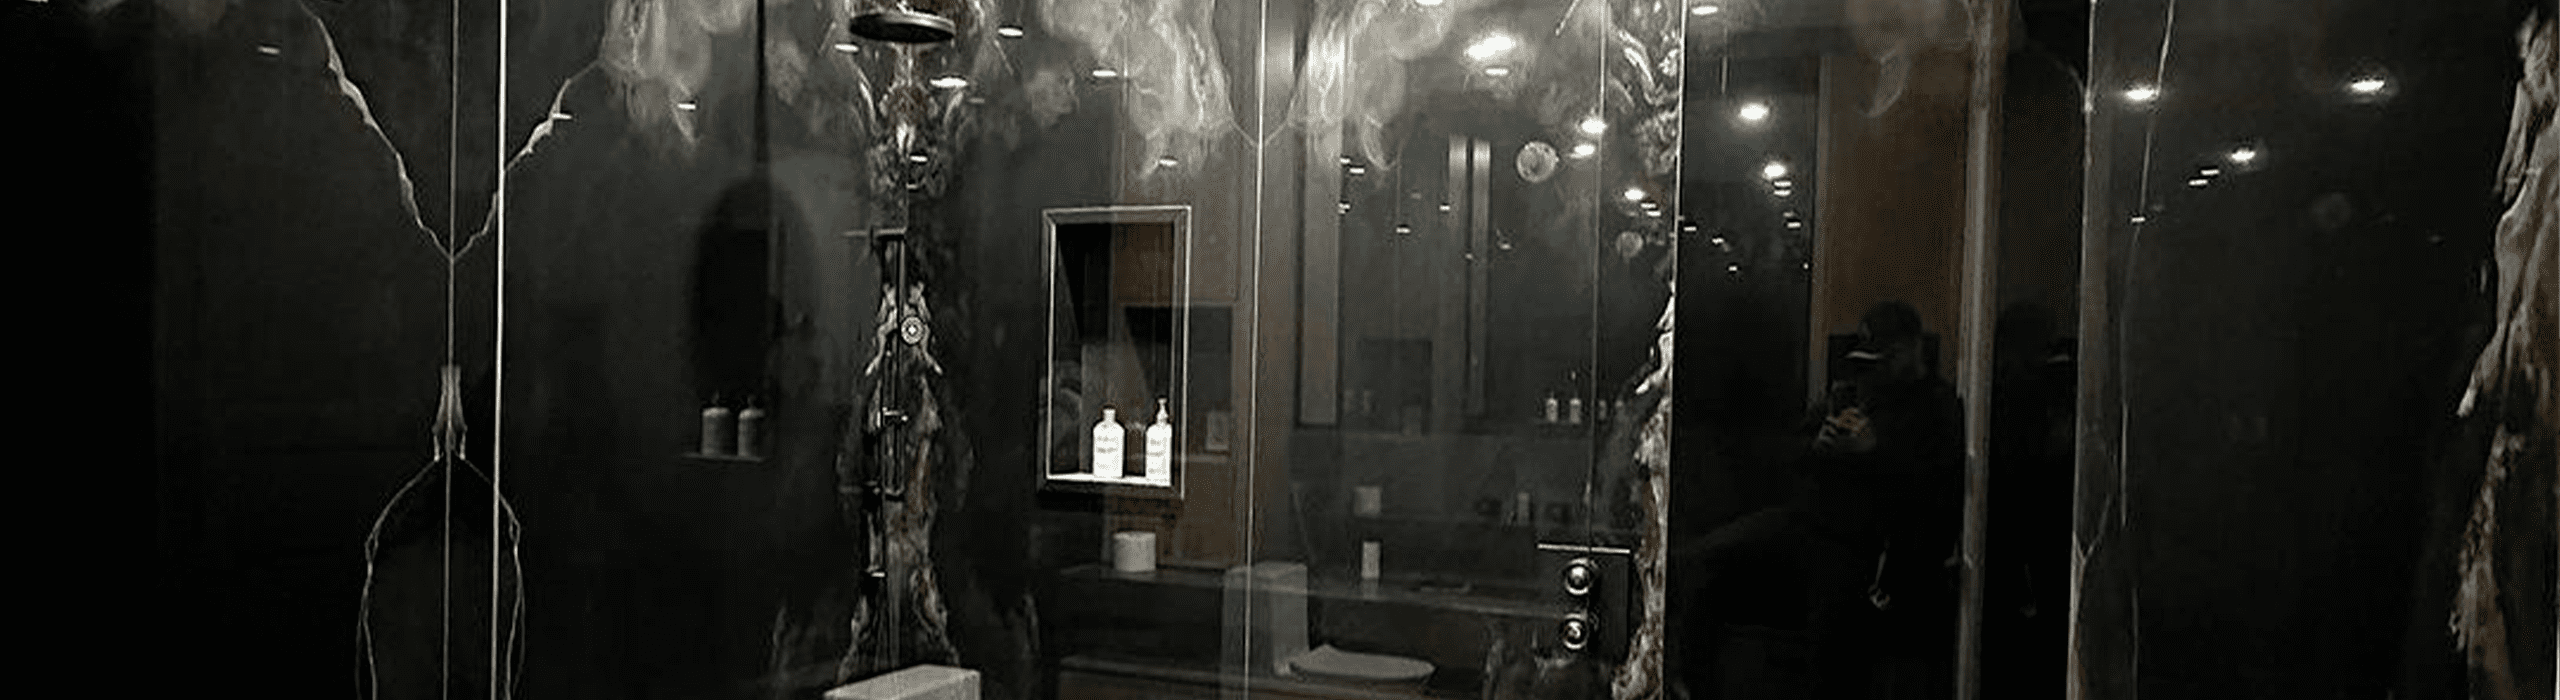 The Evolution of Shower Enclosures: From Curtains to Glass